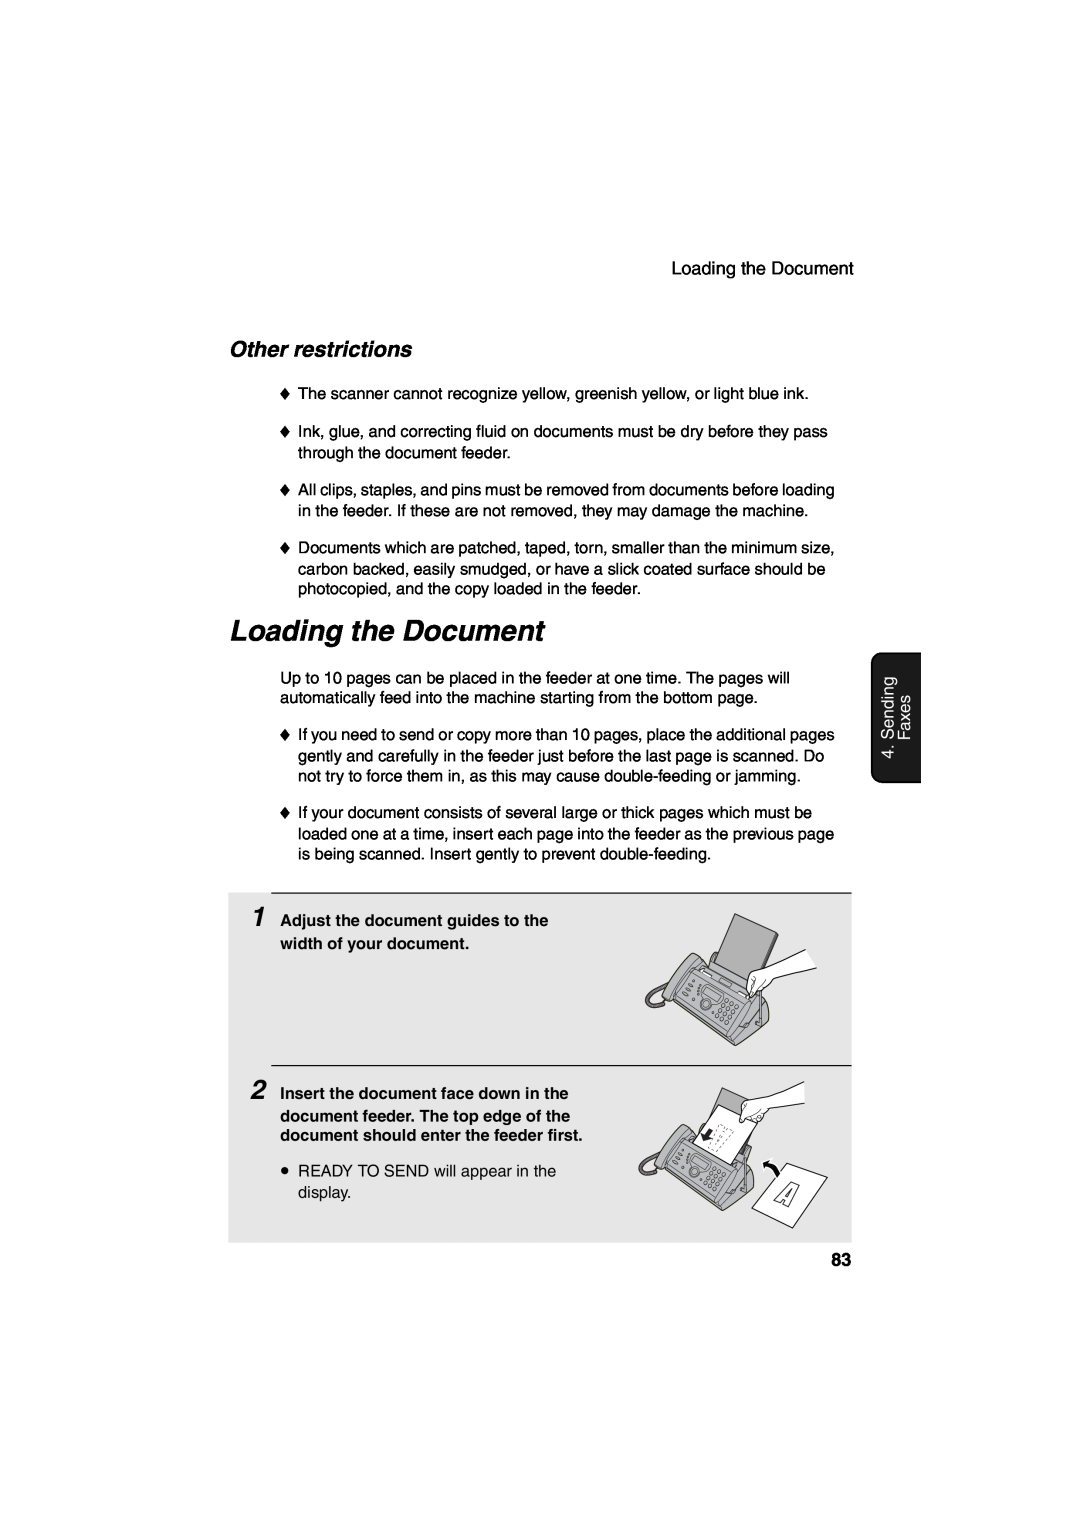 Sharp UX-CD600 operation manual Loading the Document, Other restrictions, Sending, Faxes 